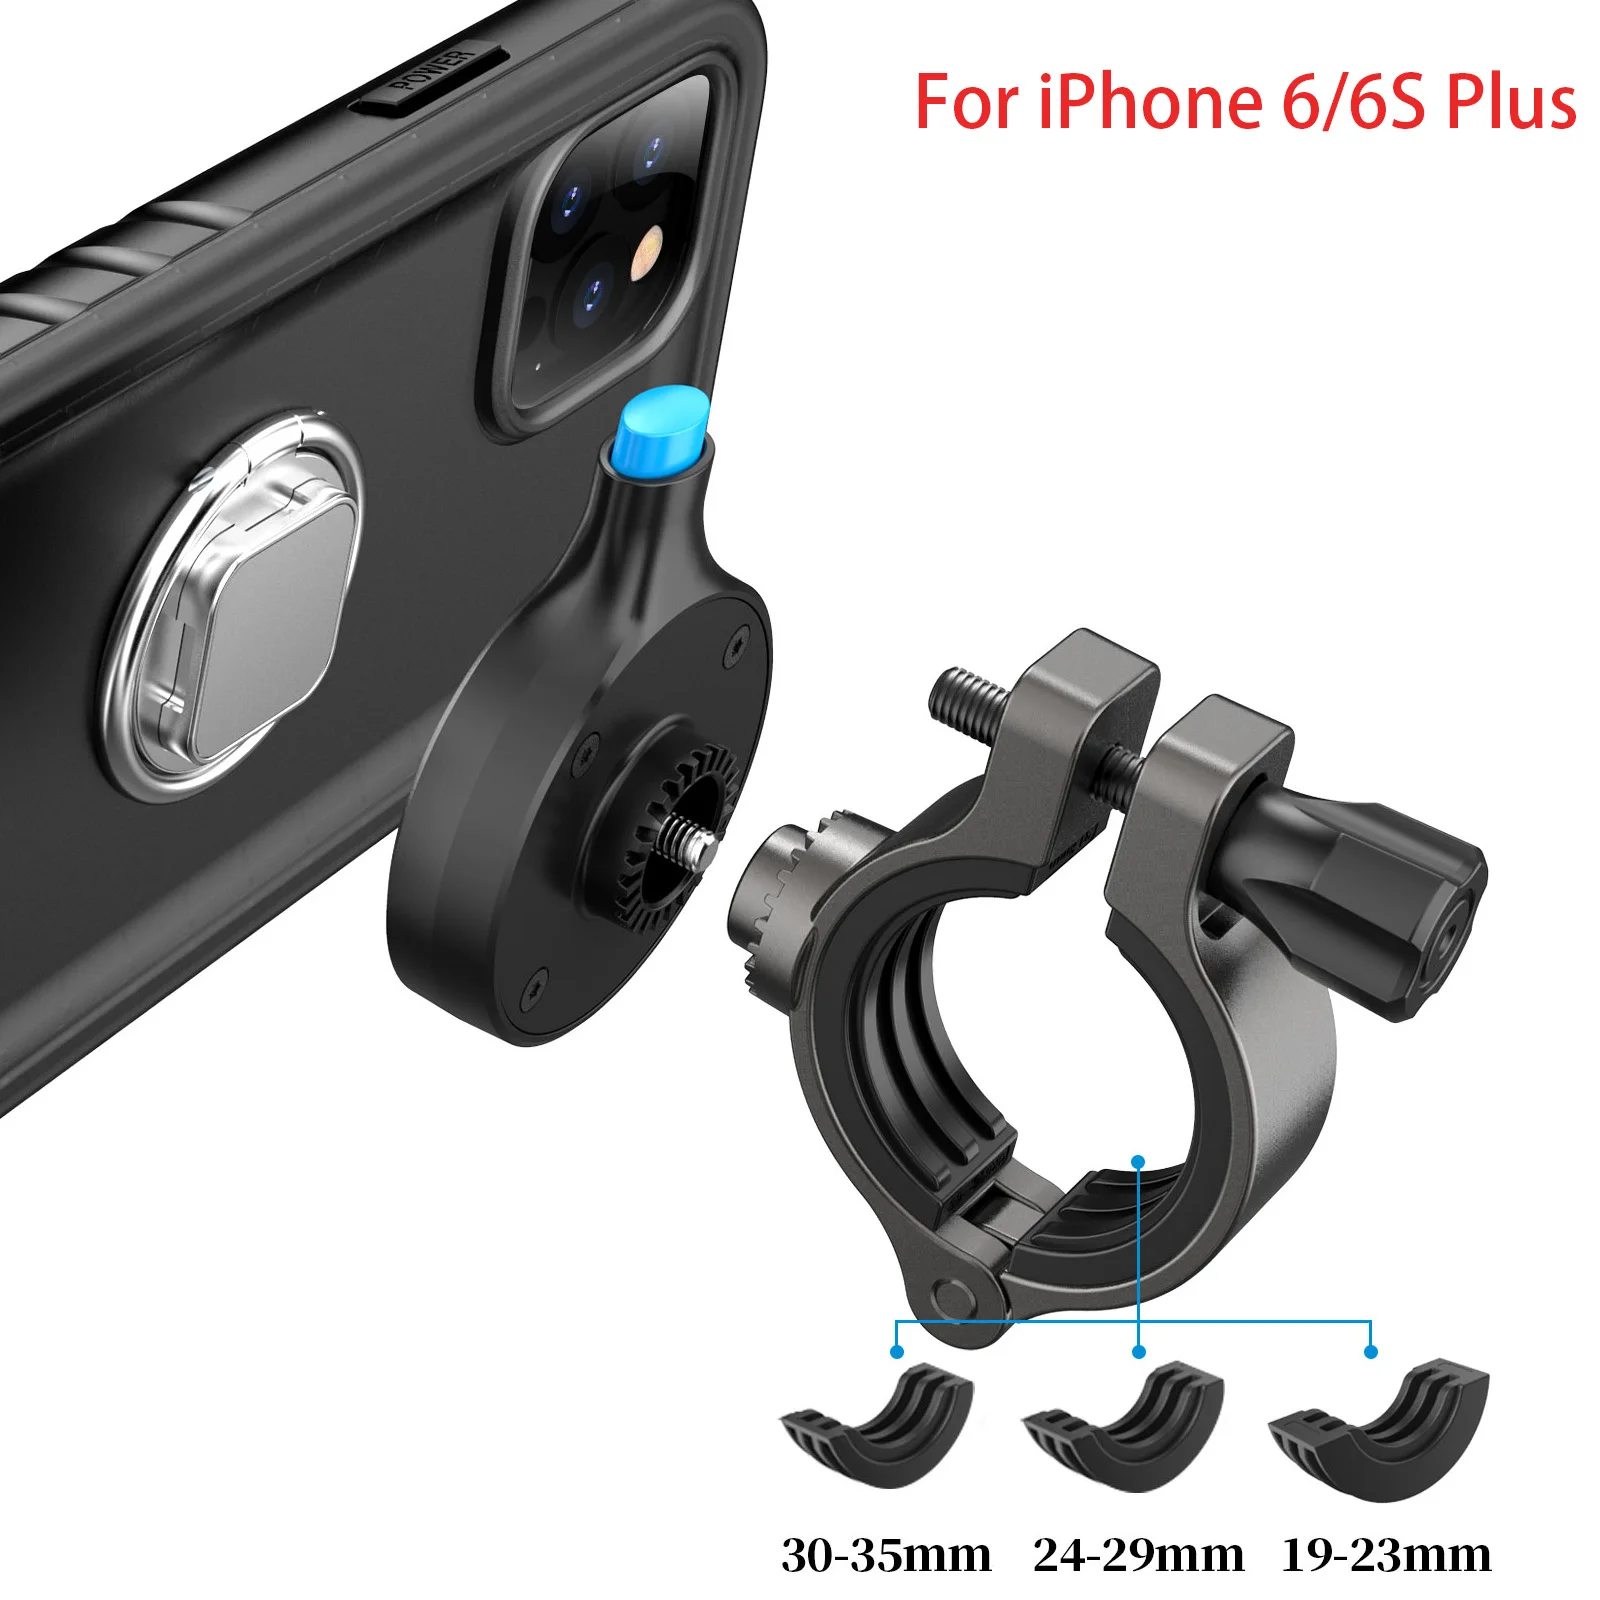 Cozycase Motorcycle Bike Bicycle Phone Holder Mount With Waterproof Case For iPhone 12 11 Pro XS Max XR 8 Plus 7 SE2020 6S Black mobile stand holder Holders & Stands